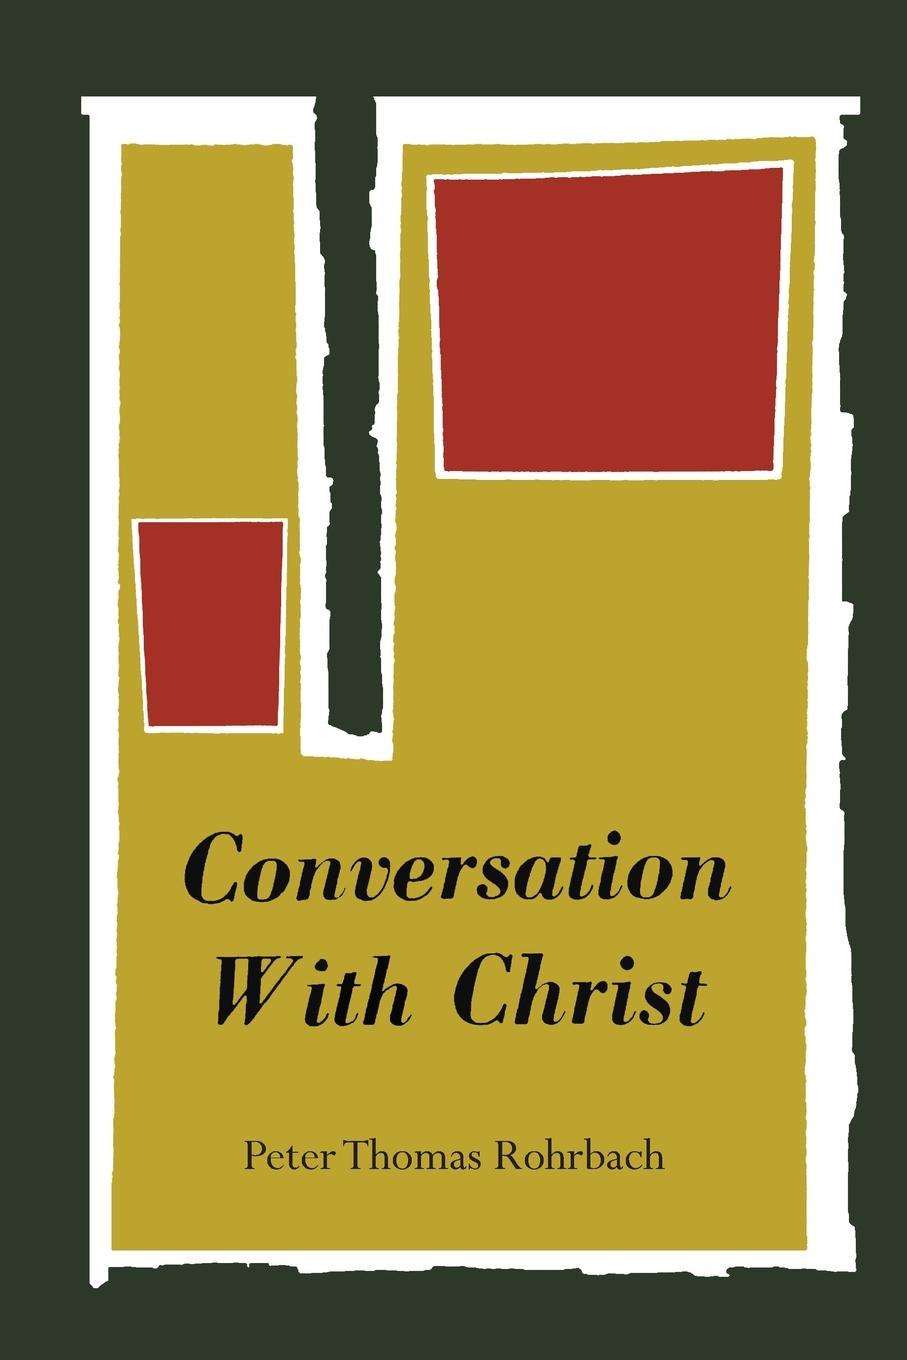 Conversation with Christ - Rohrbach, Peter Thomas|Rohrbach, Peter-Thomas